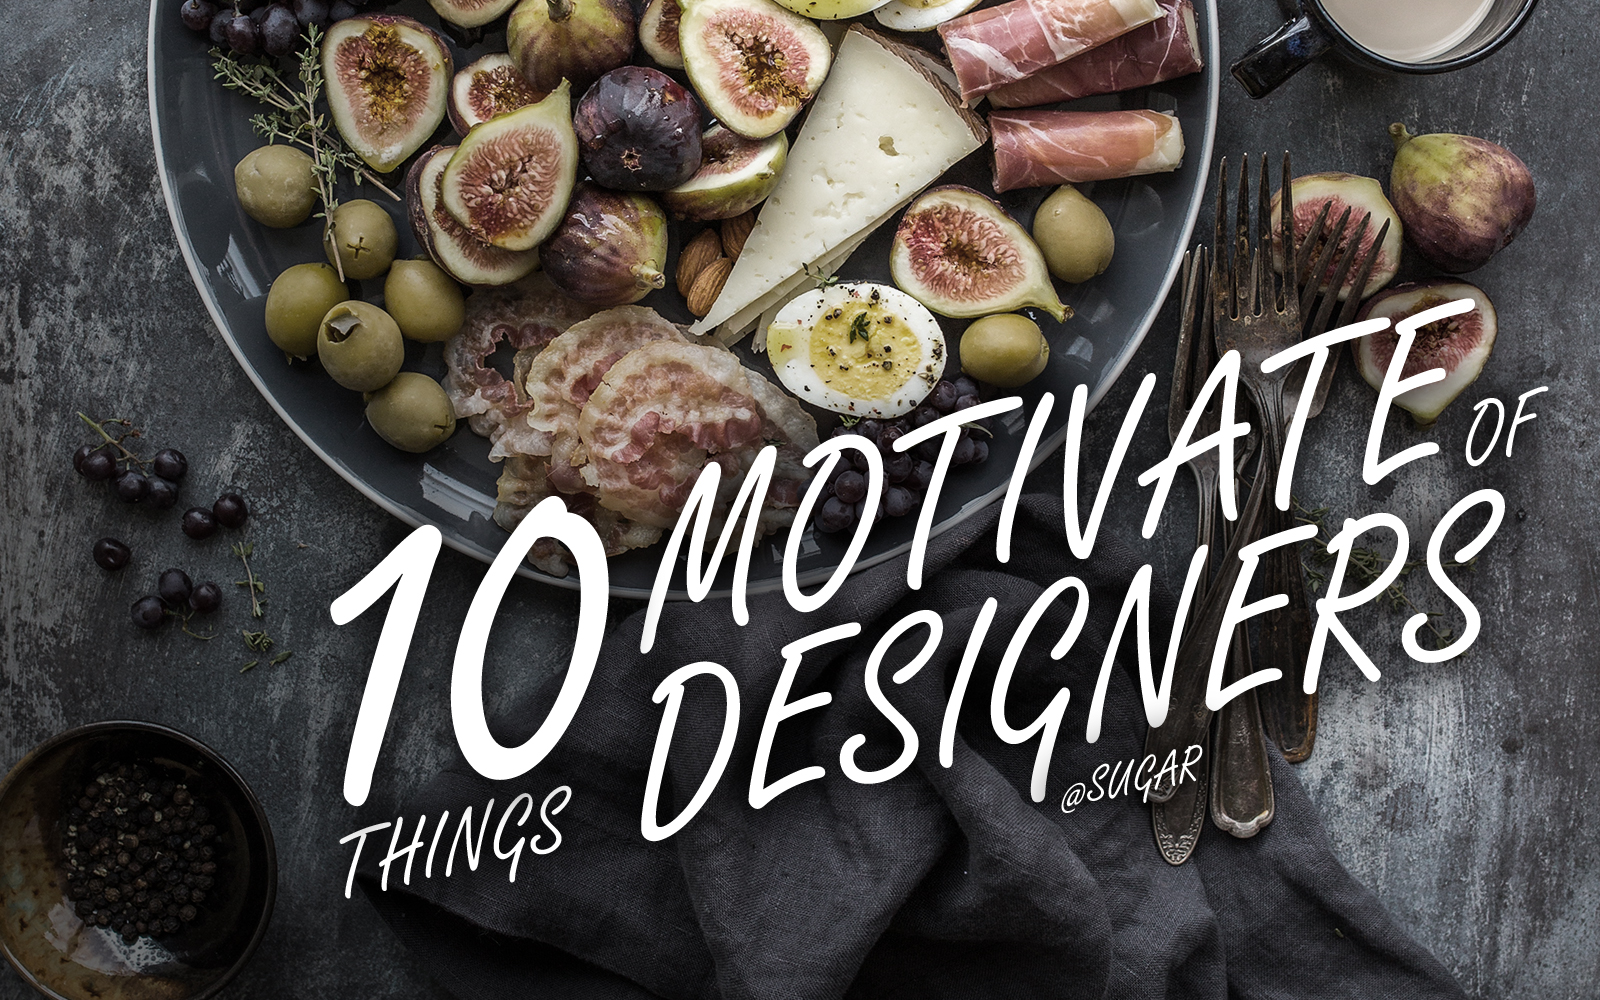 10 things motivate of designers